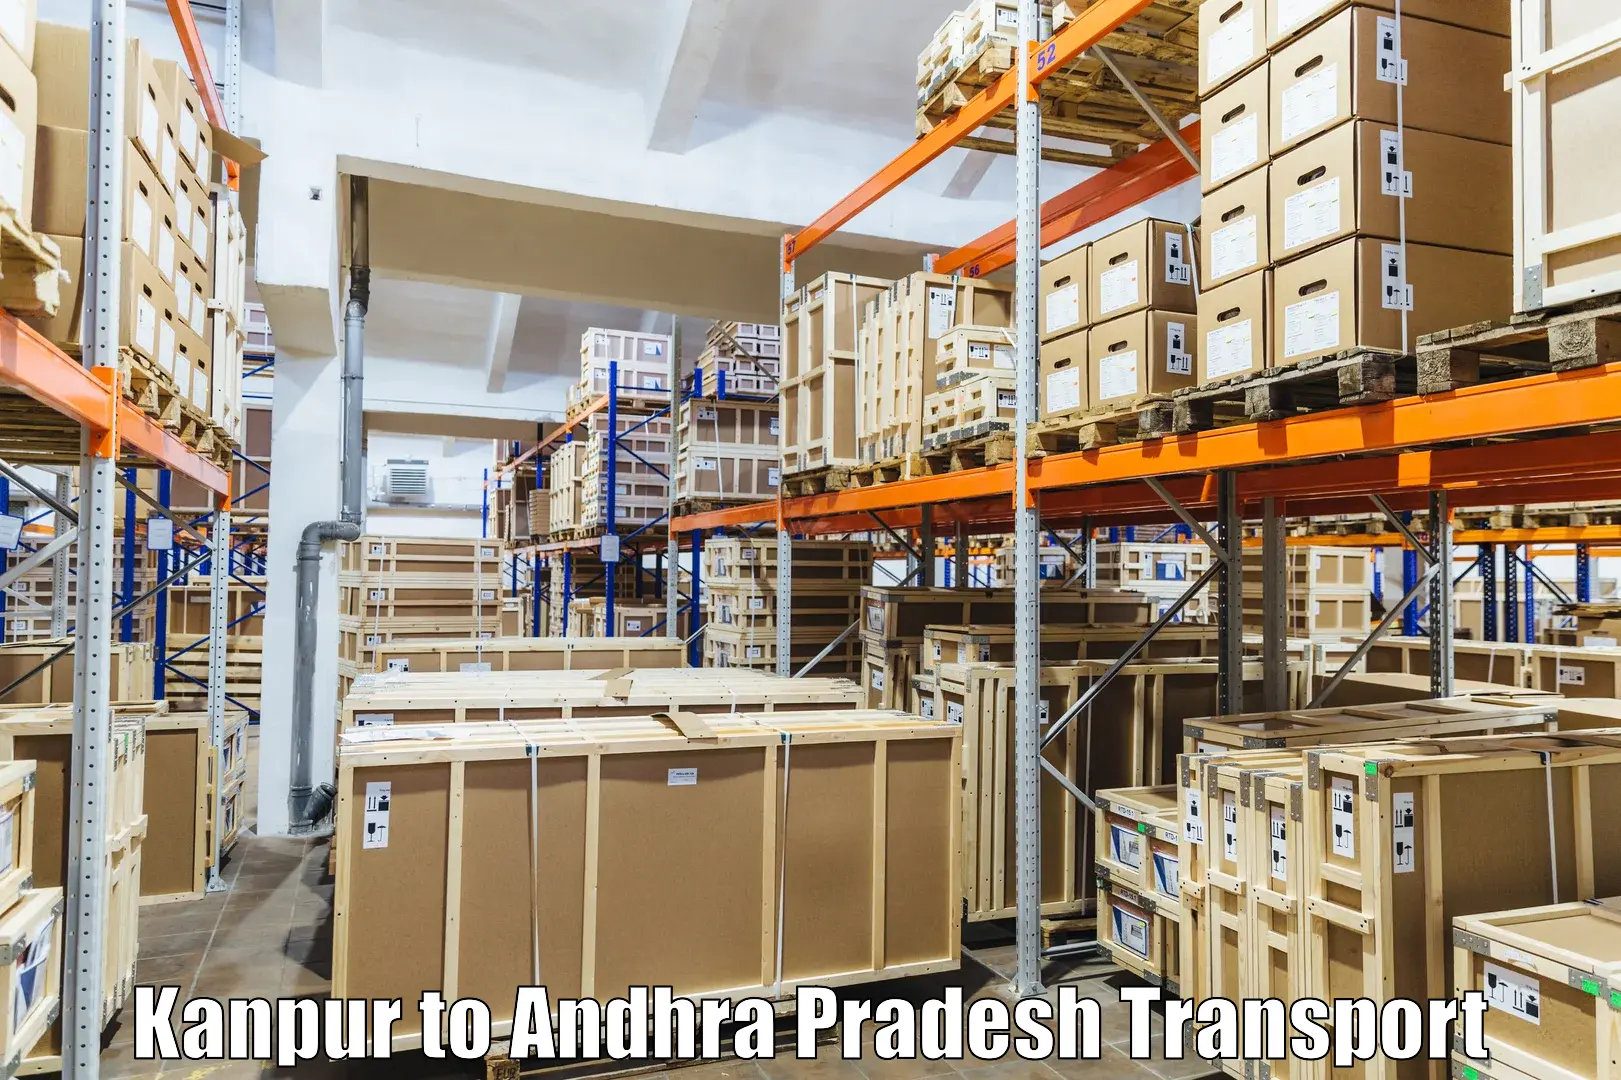 Container transportation services Kanpur to Tirupati